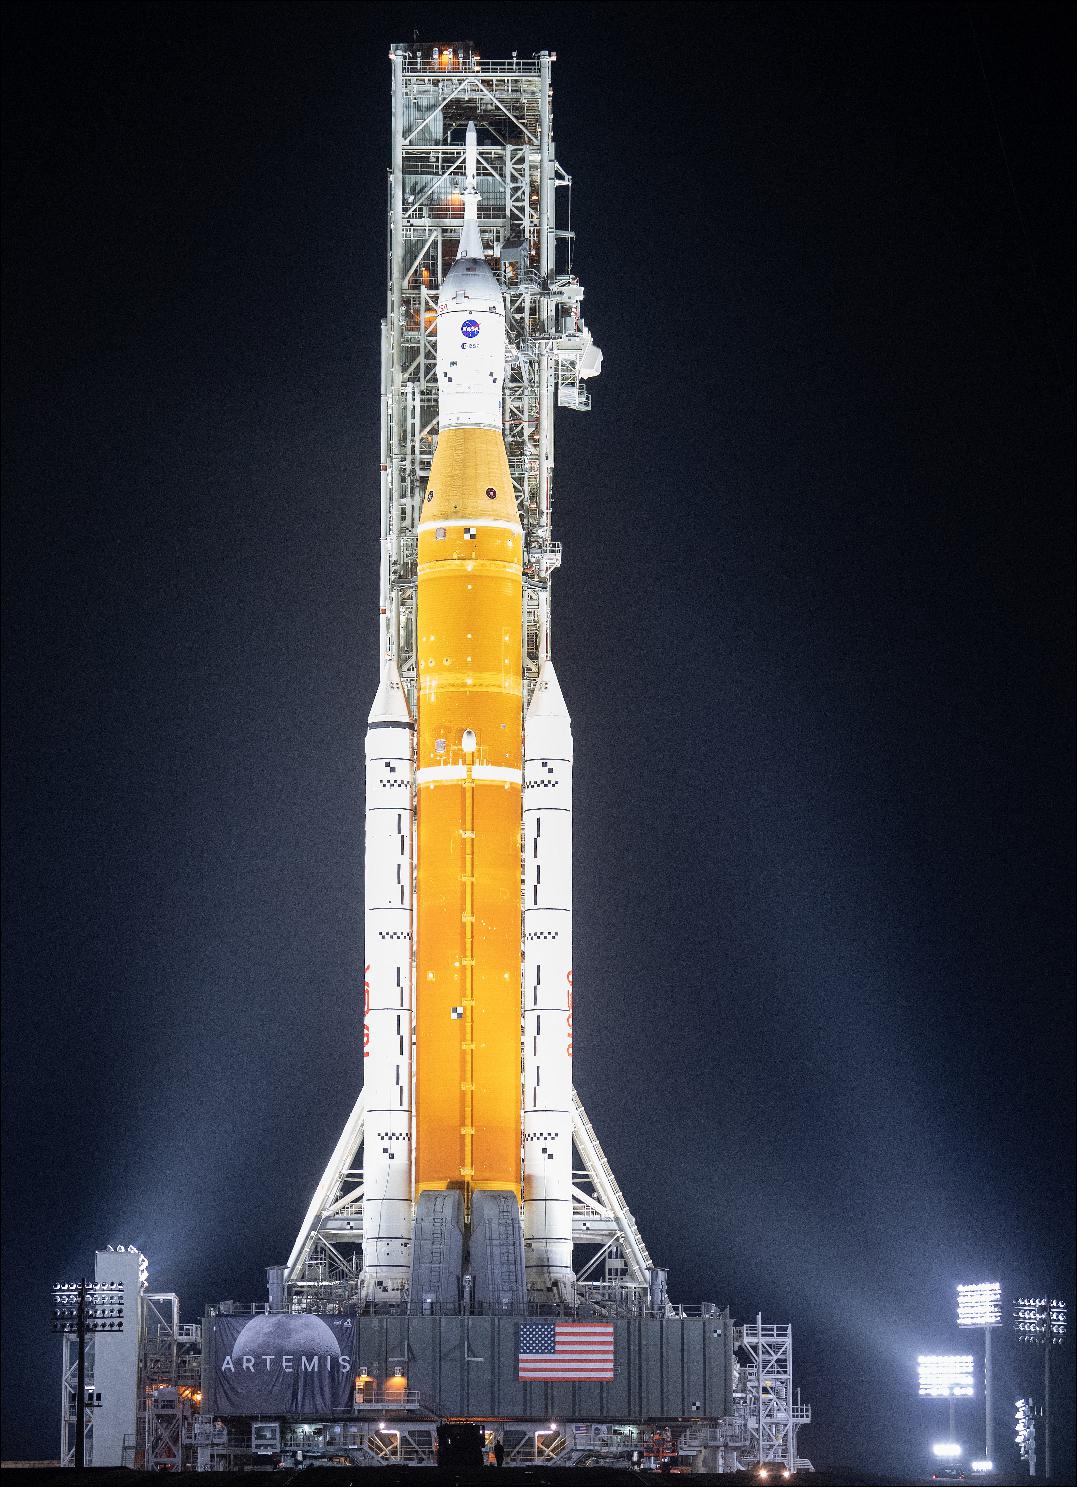 Figure 8: NASA’s Space Launch System (SLS) rocket with the Orion spacecraft aboard is seen illuminated by spotlights atop a mobile launcher at Launch Complex 39B, Friday, March 18, 2022, after being rolled out to the launch pad for the first time at NASA’s Kennedy Space Center in Florida. Ahead of NASA’s Artemis I flight test, the fully stacked and integrated SLS rocket and Orion spacecraft will undergo a wet dress rehearsal at Launch Complex 39B to verify systems and practice countdown procedures for the first launch (image credit: NASA)